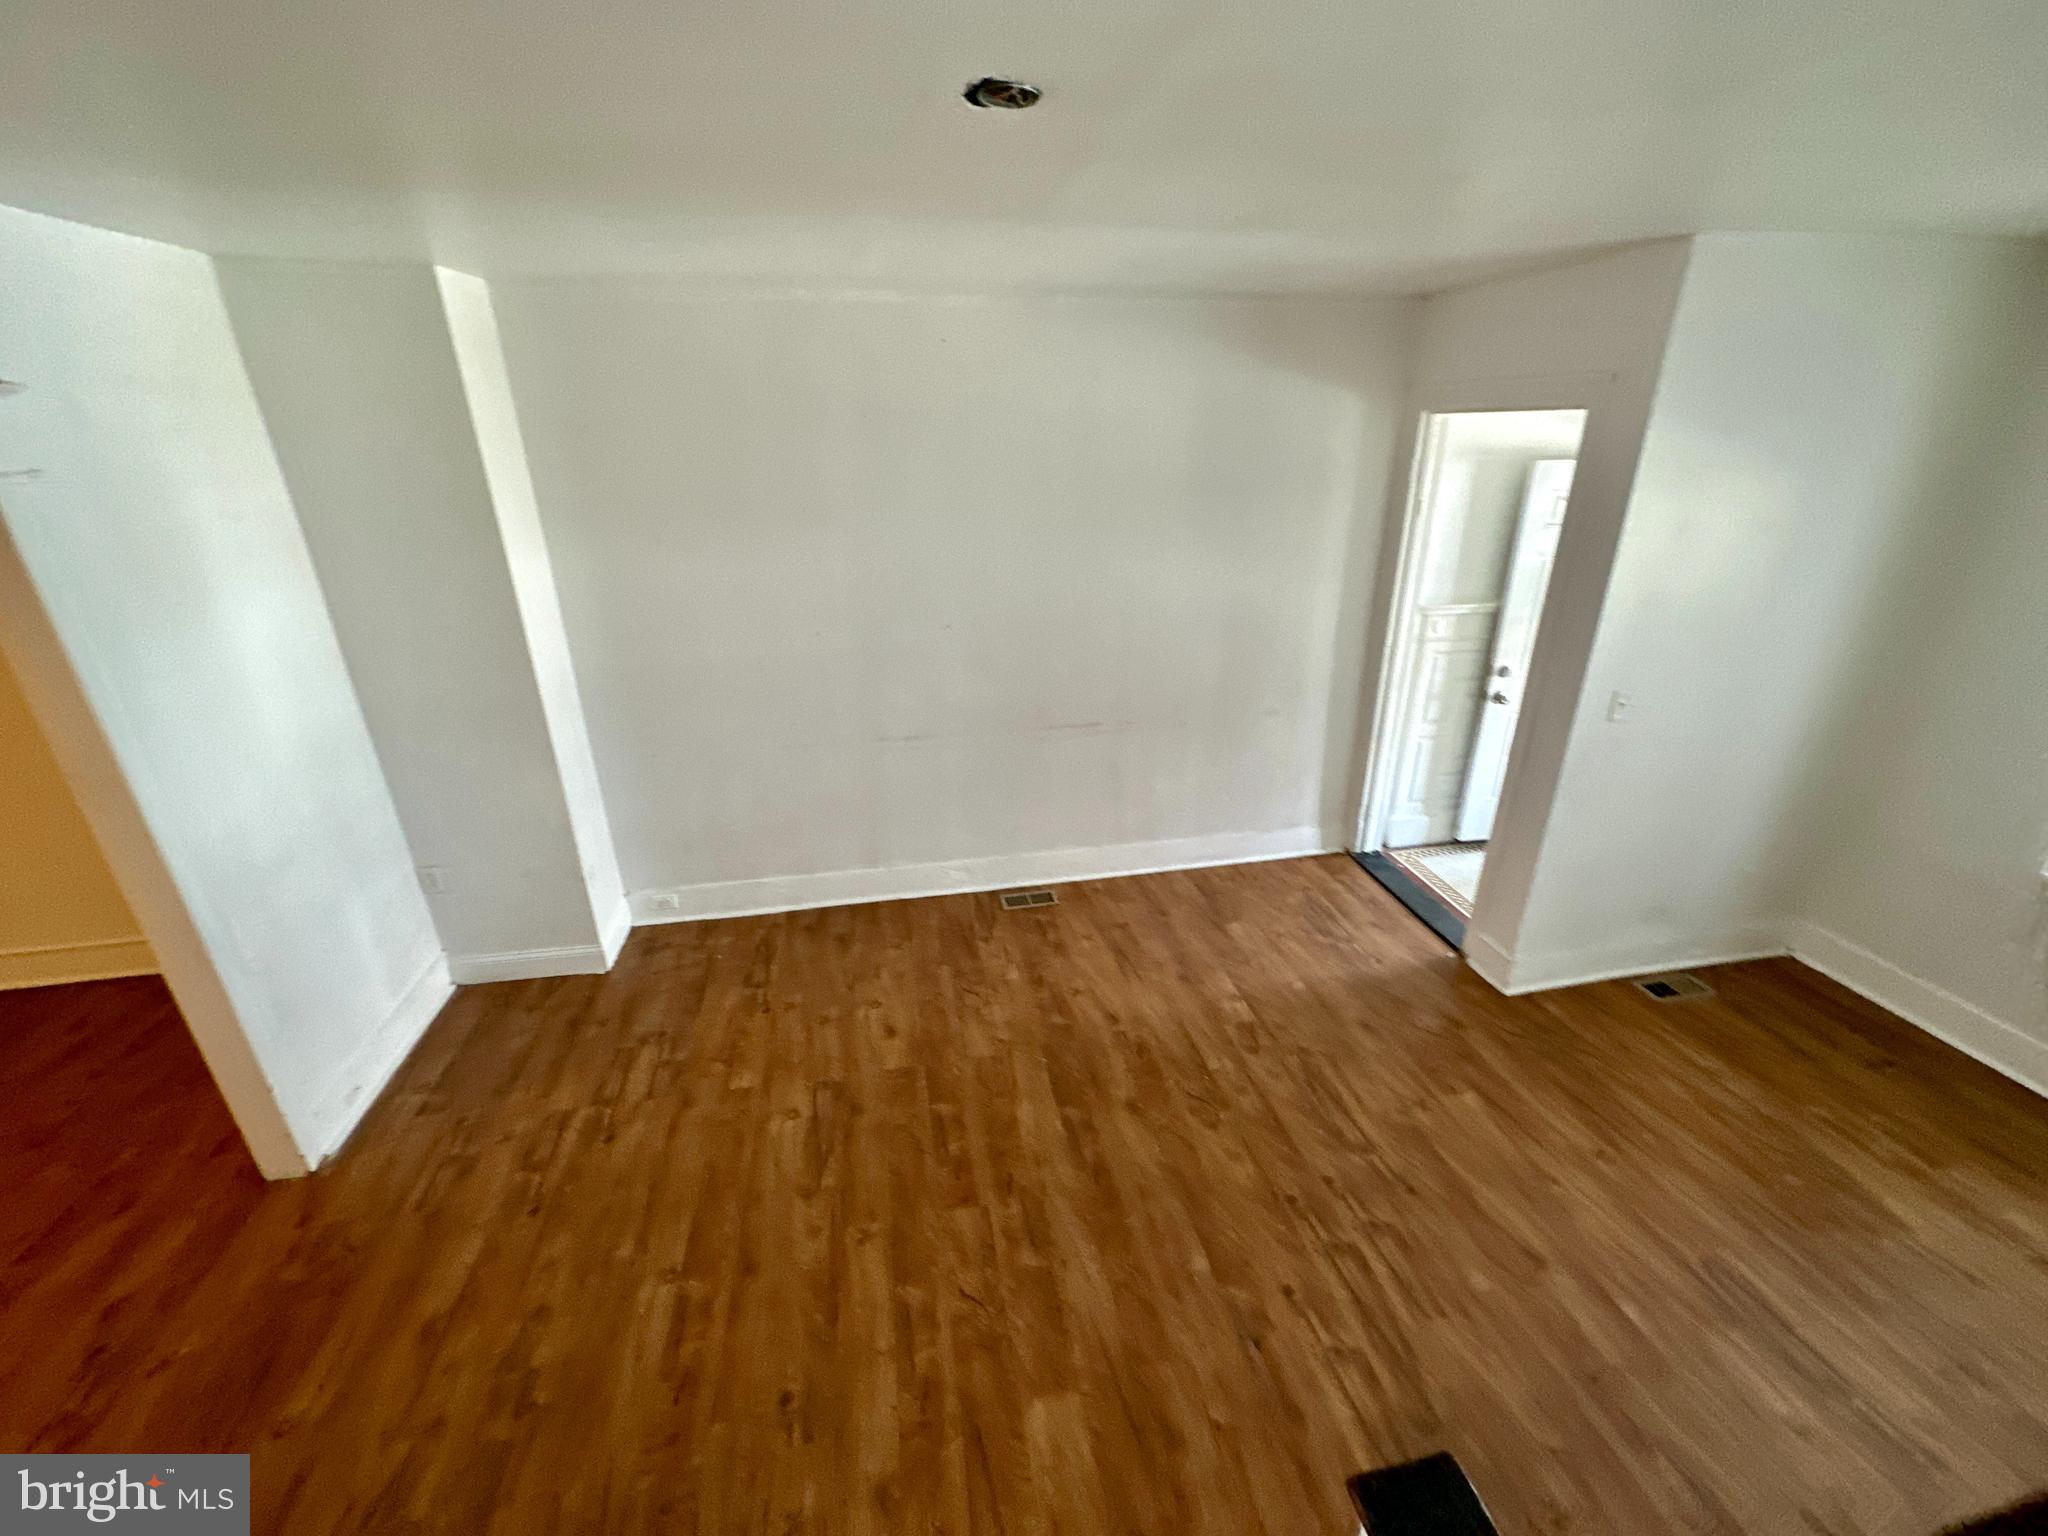 an empty room with wooden floor and entrance